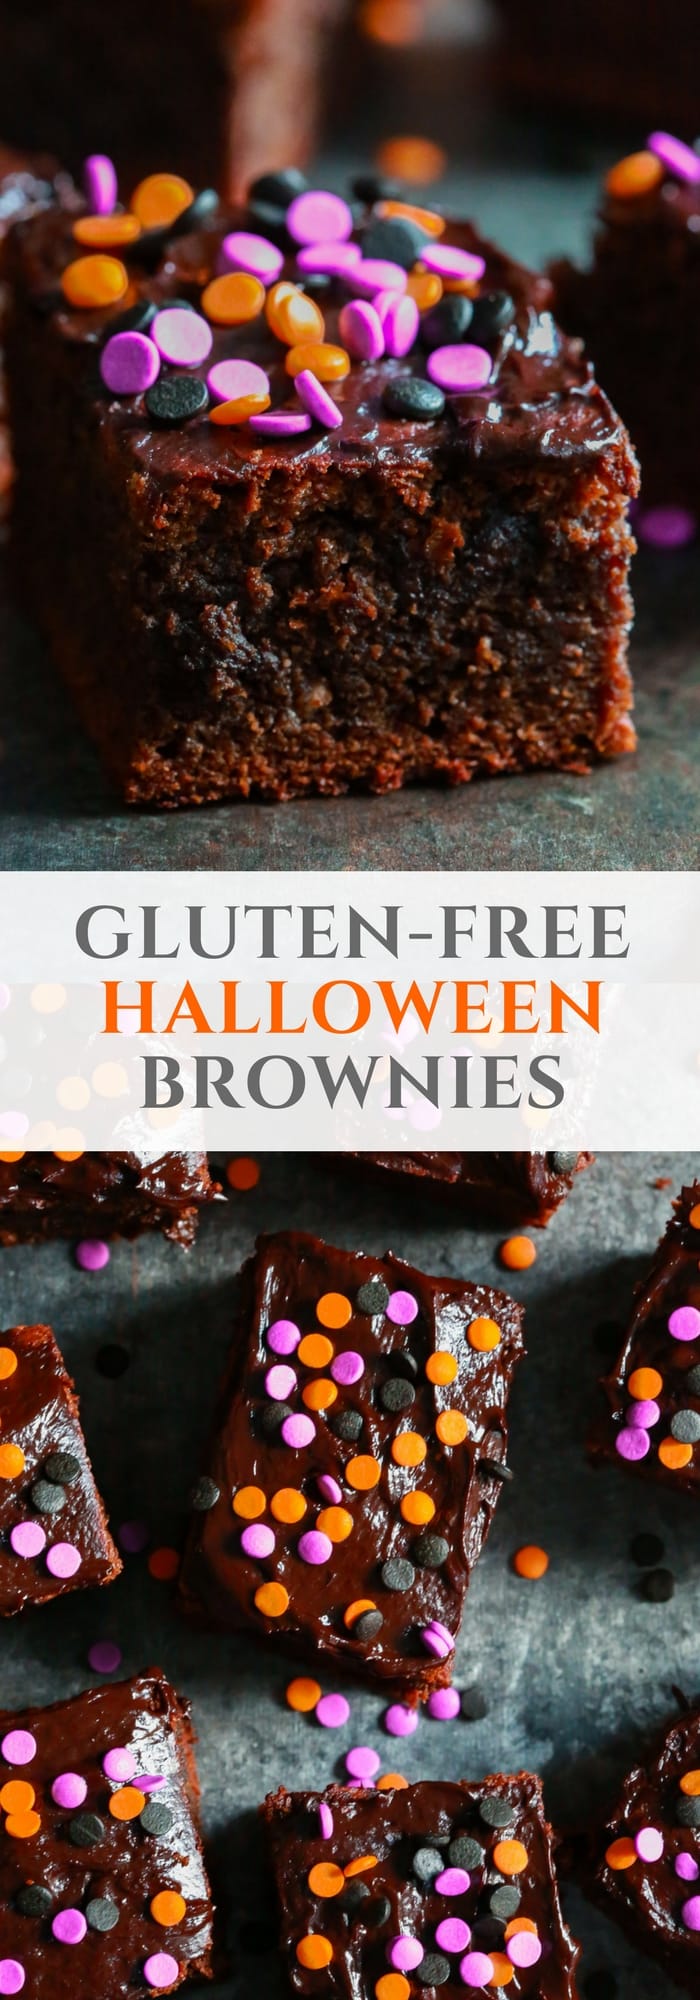  Ready to have a delicious Halloween treat without feeling guilty? I bet you are, so make these Gluten-free Halloween Brownies with your kids using only almond butter, instead of regular flour!